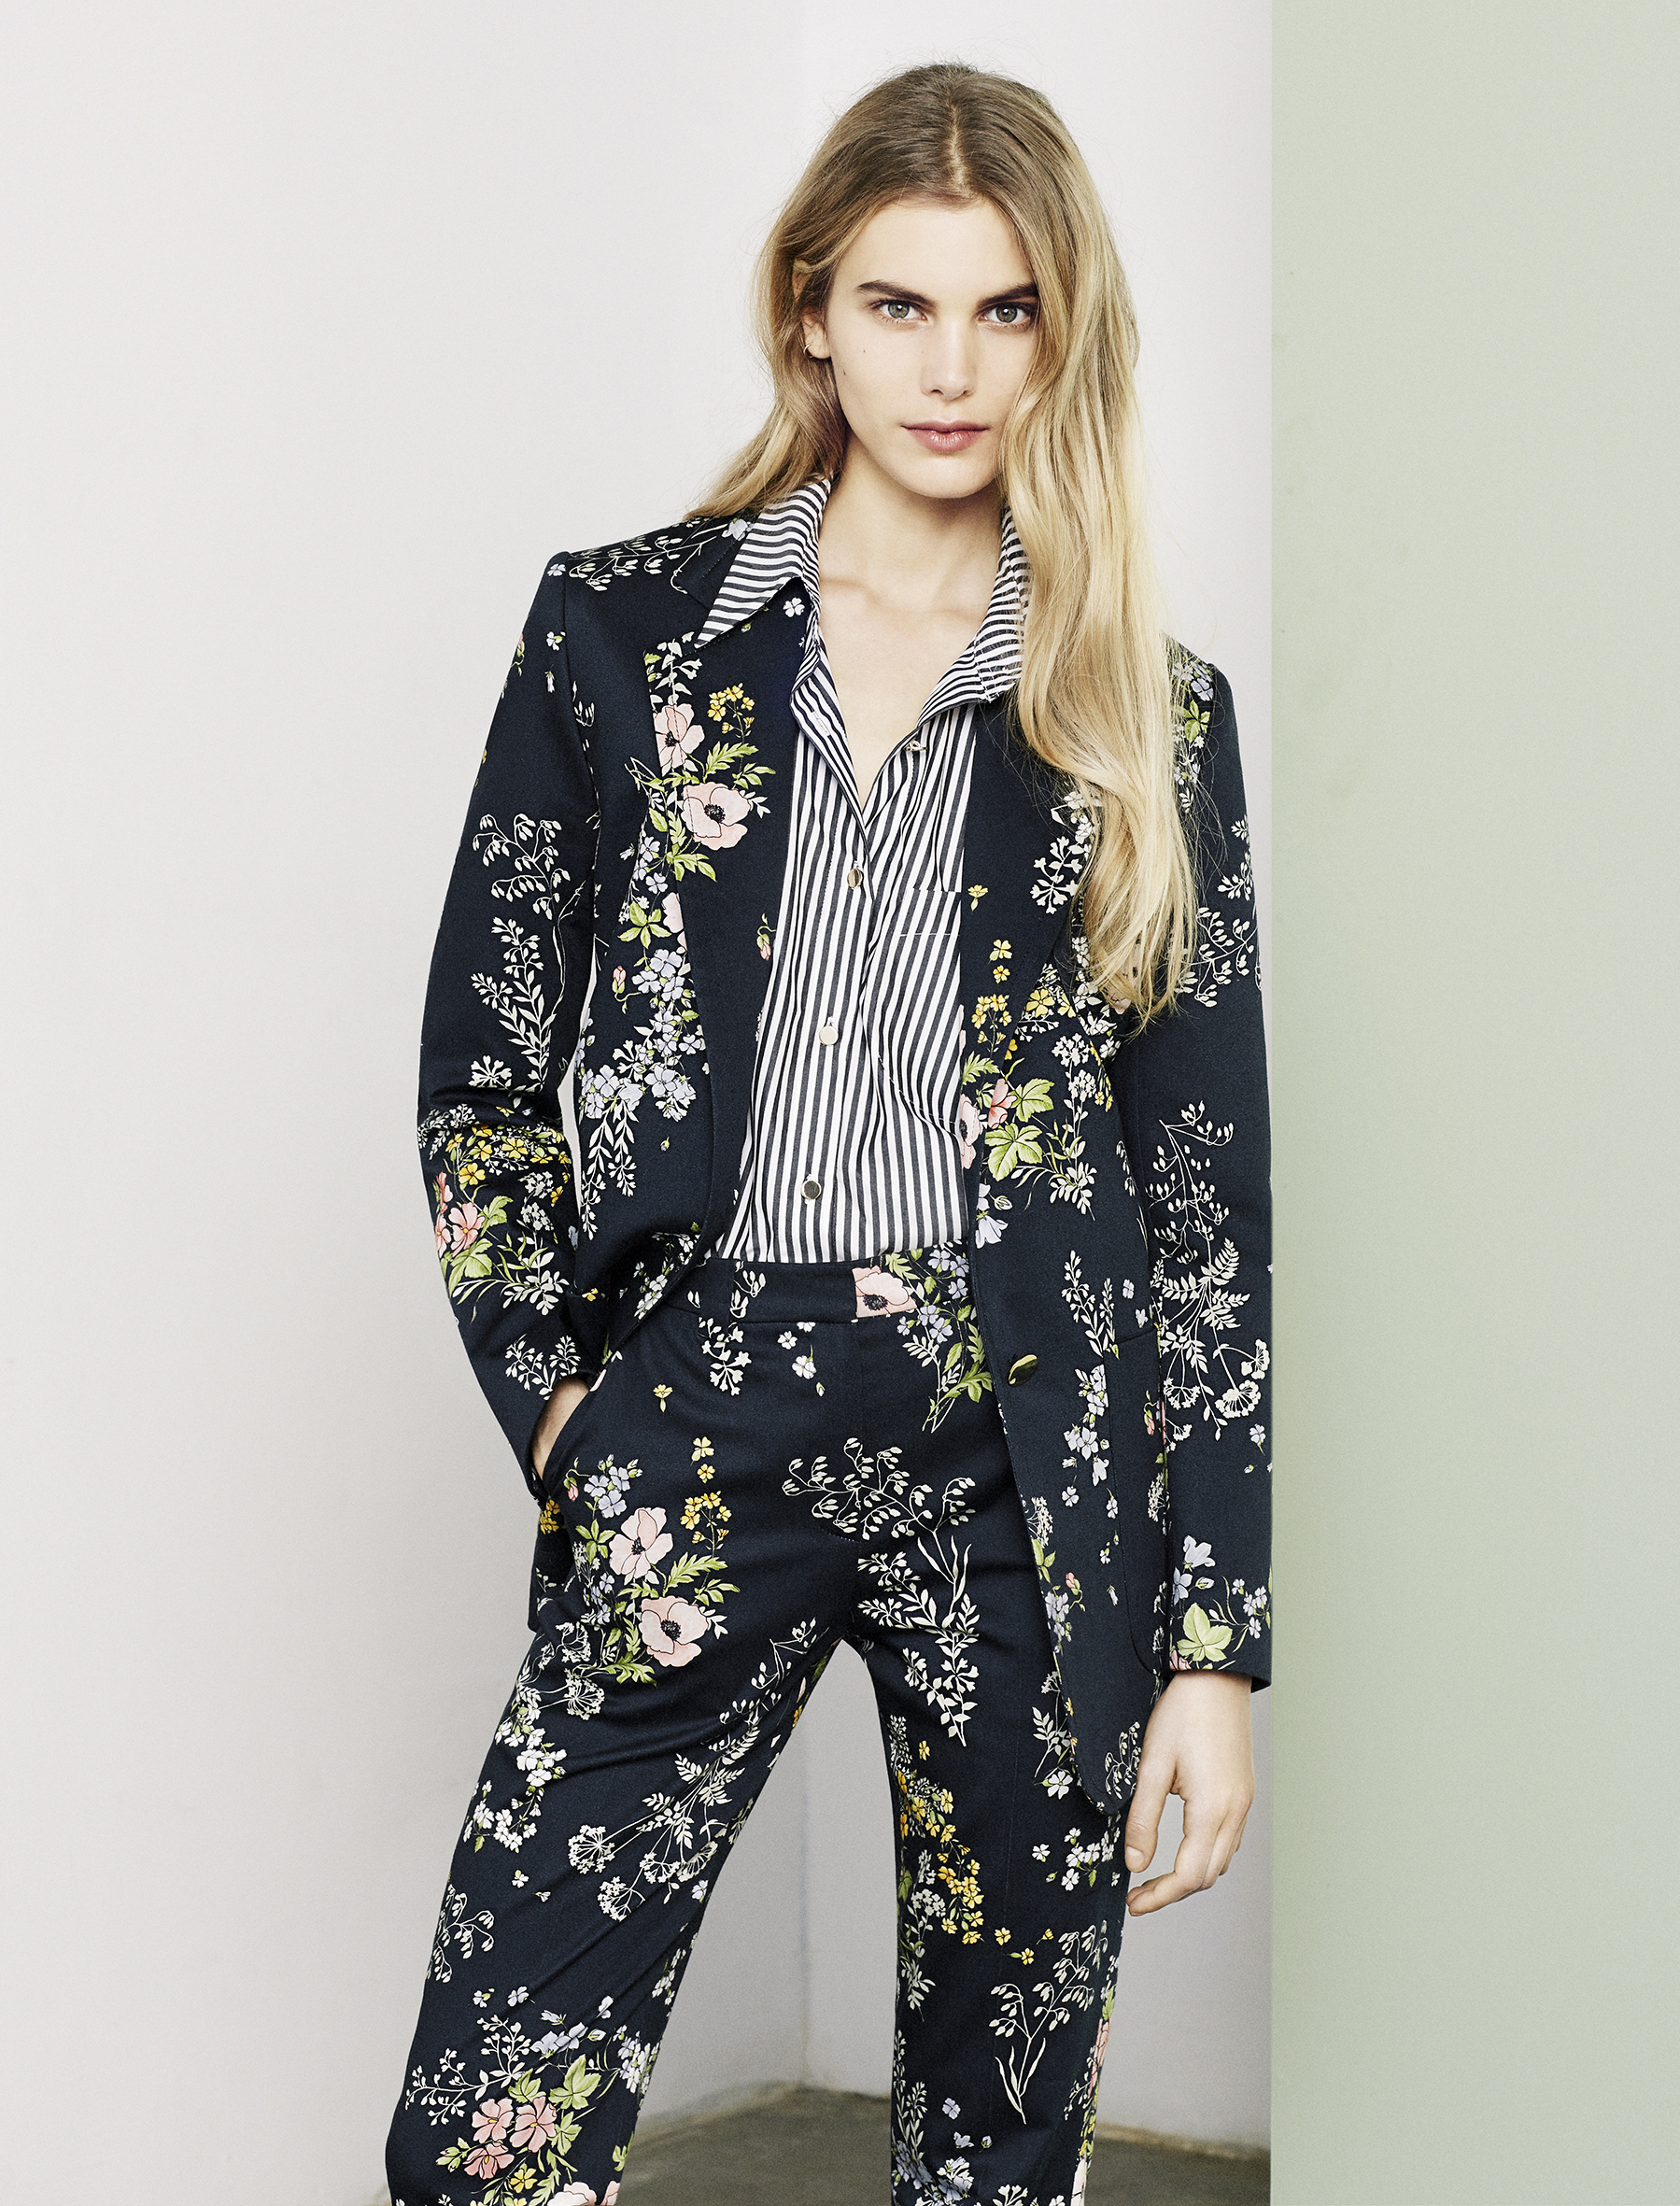 Topshop Unique Launches First High Summer Collection | Fashion News ...